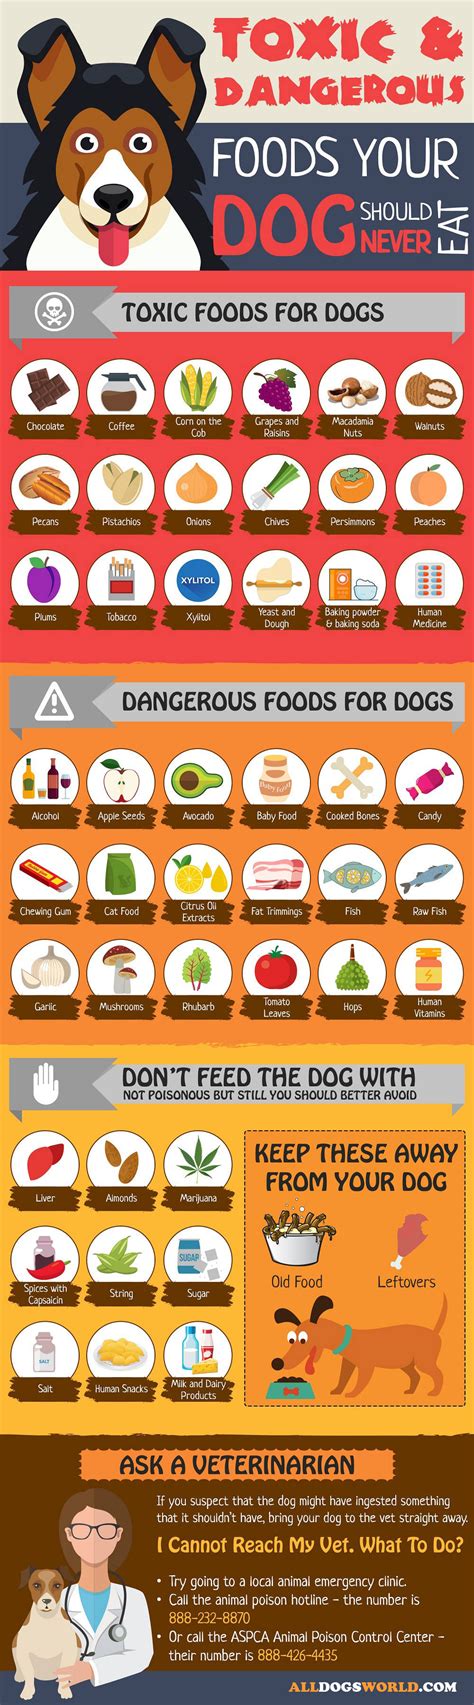 Toxic Foods For Dogs List Dangerous Foods For Dogs All Dogs World